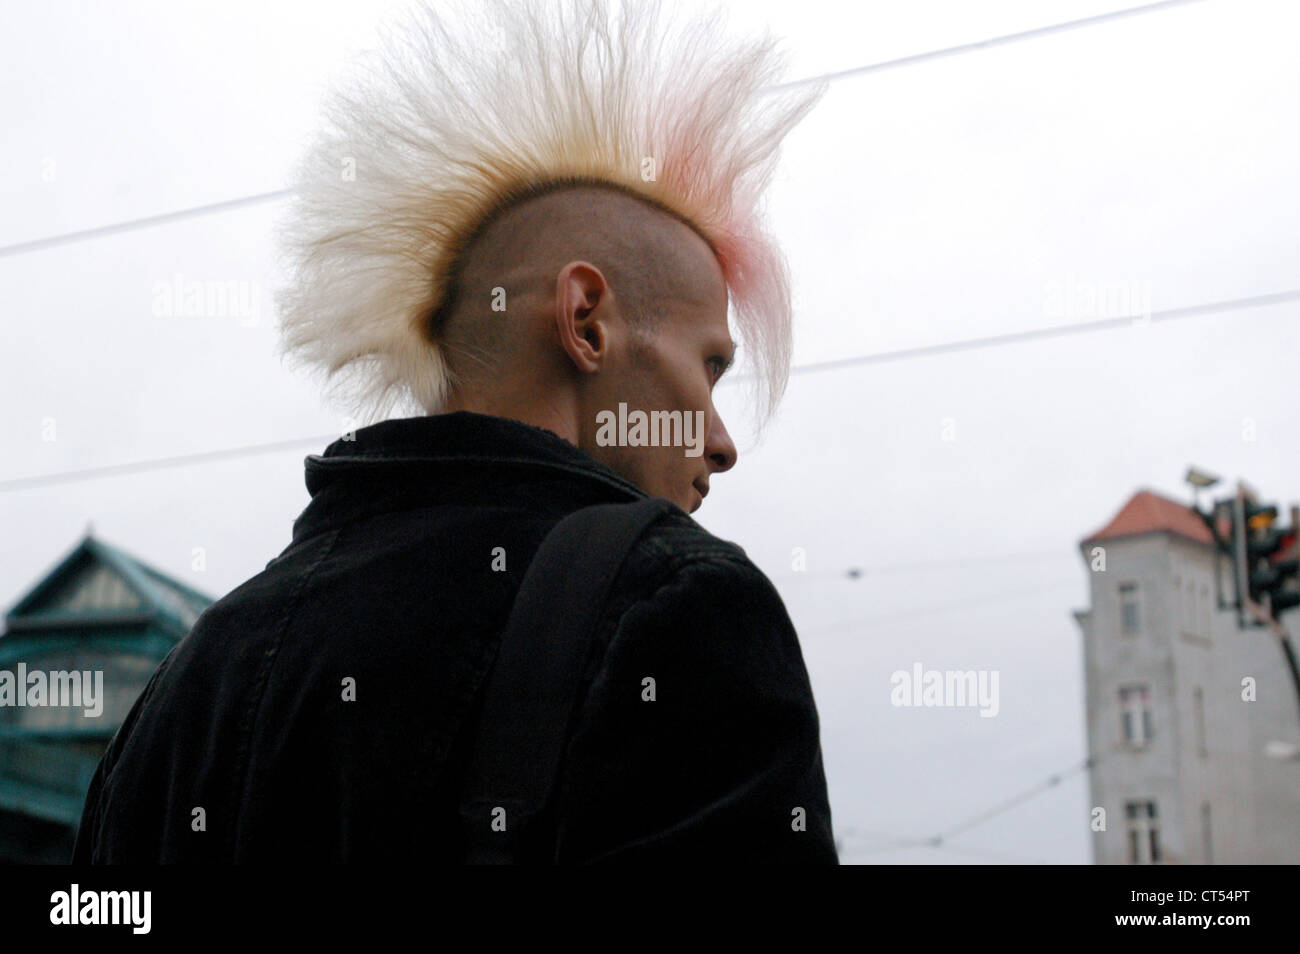 Punk with a mohawk hairstyle, Berlin Stock Photo